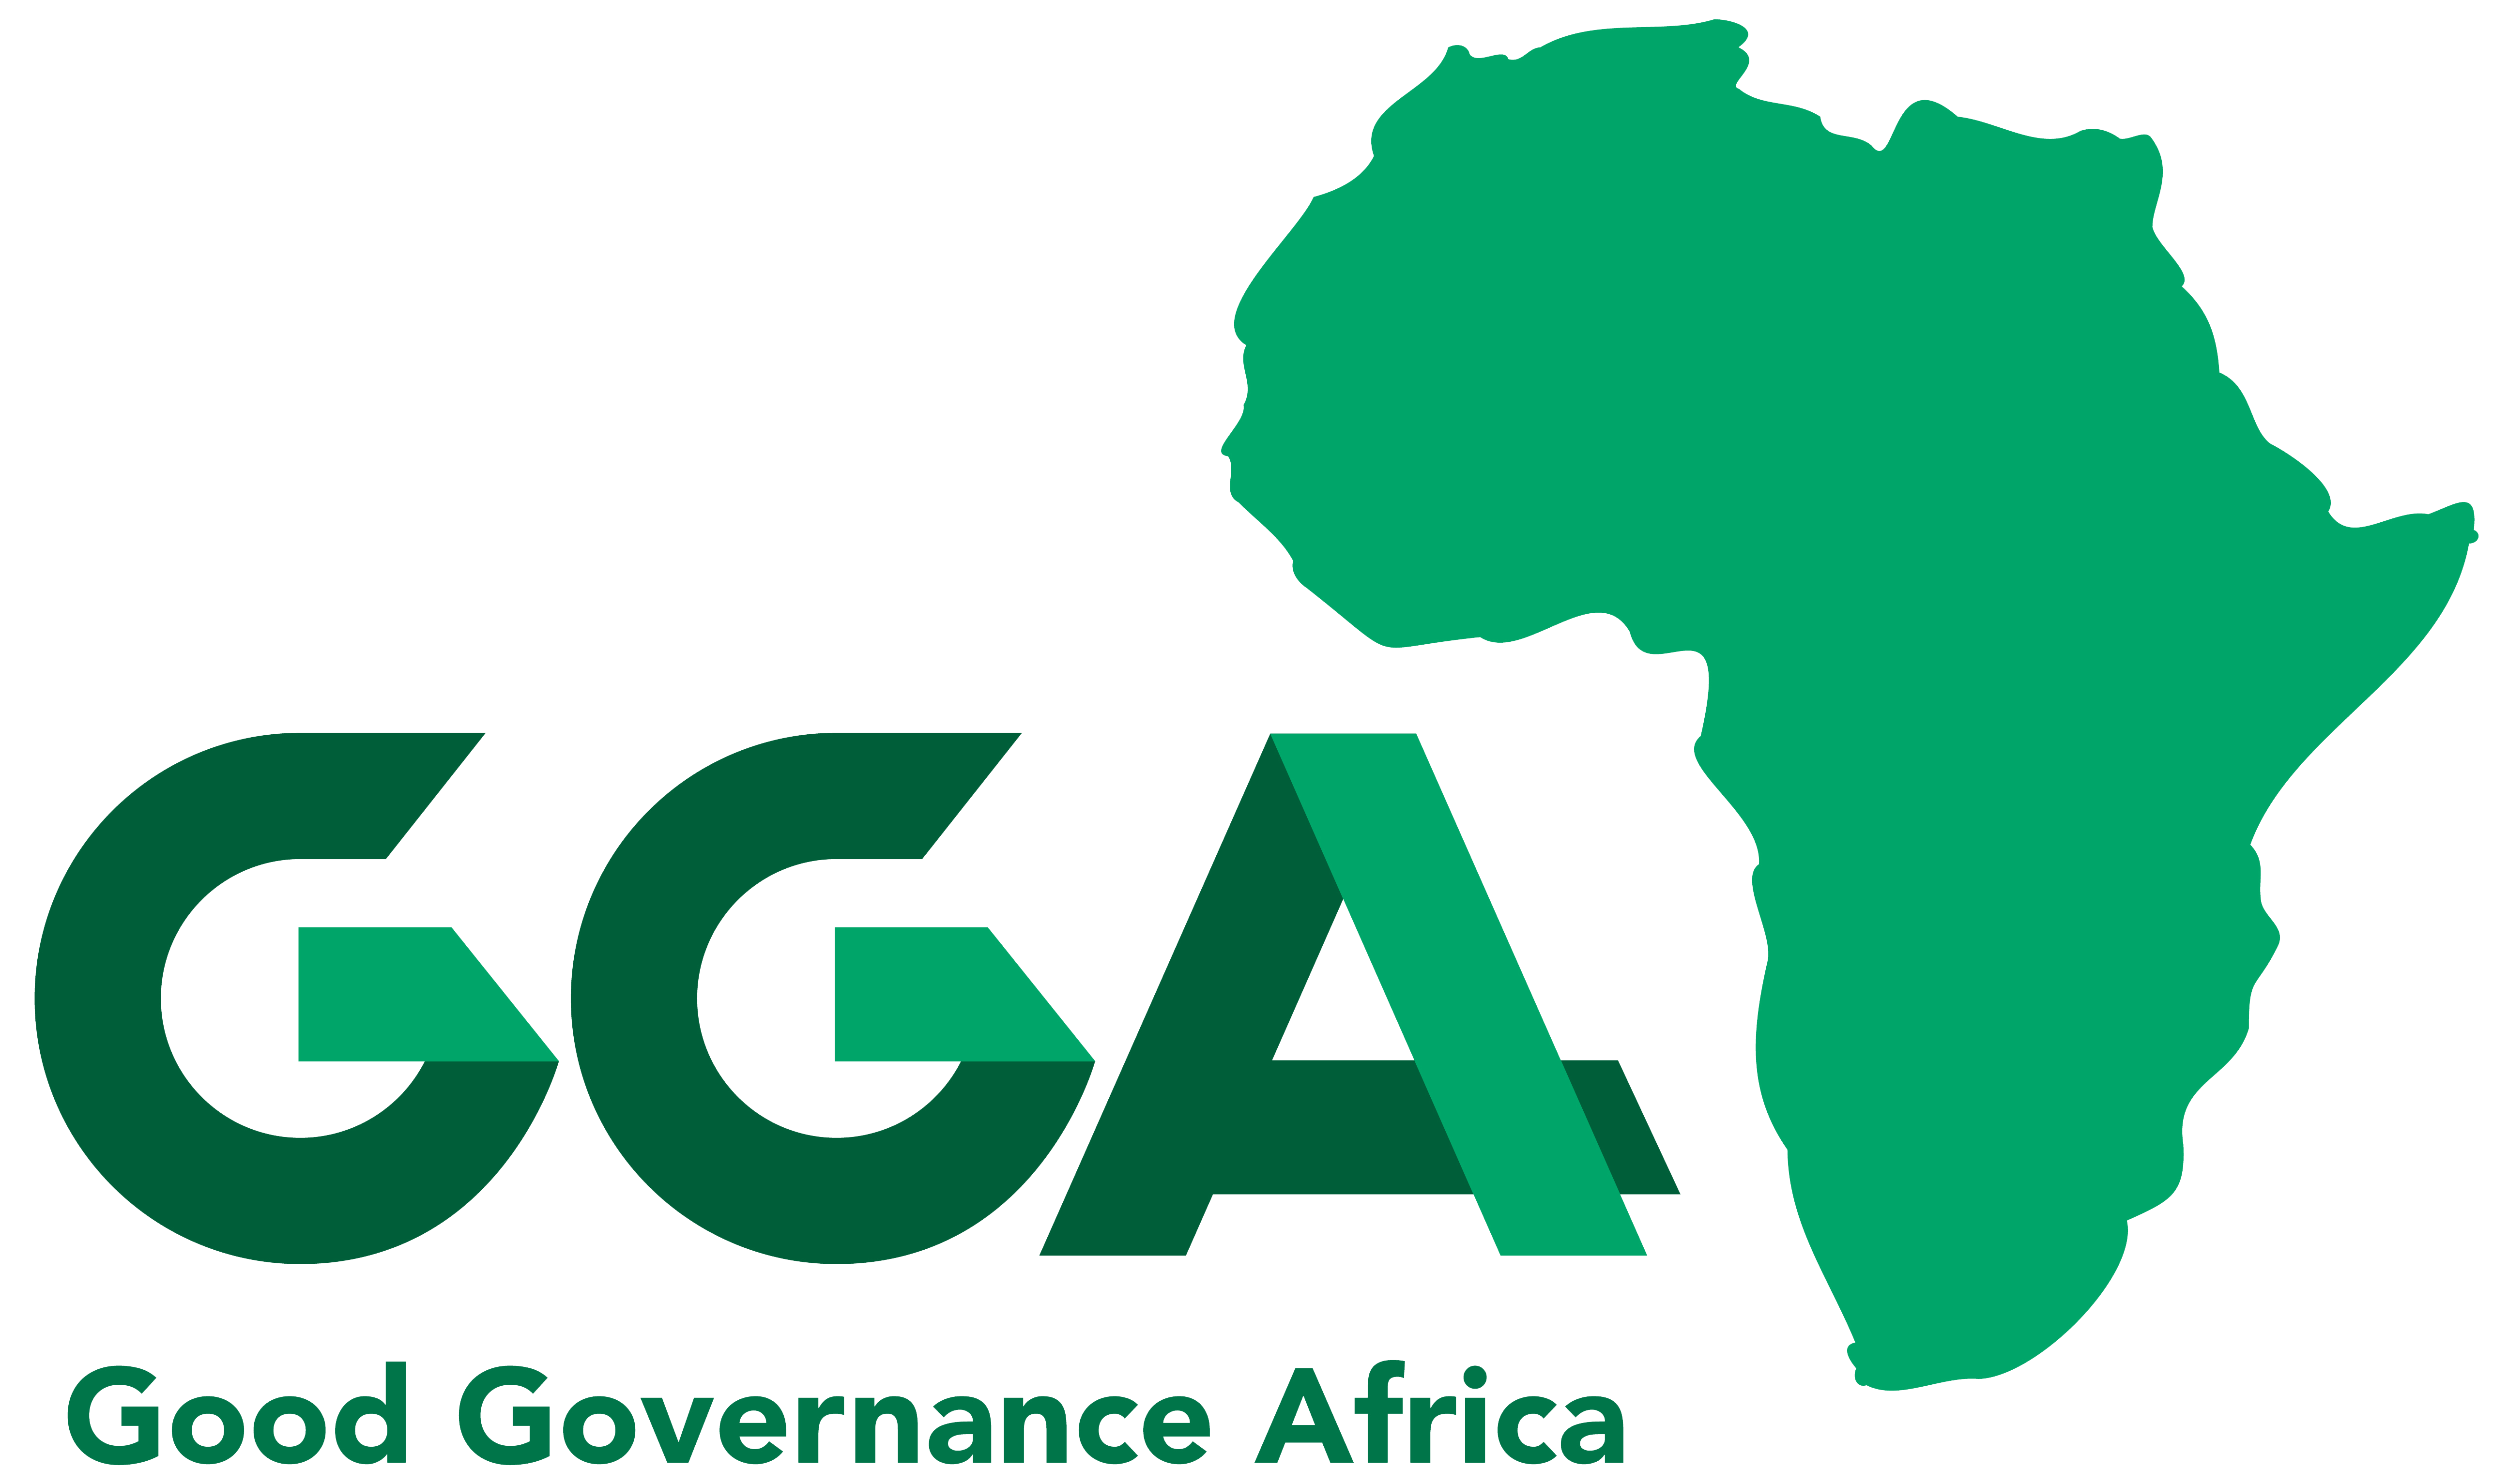 Environmental Social Governance (ESG) integration is required to promote a just energy transition in Africa (By Vincent Obisie-Orlu)